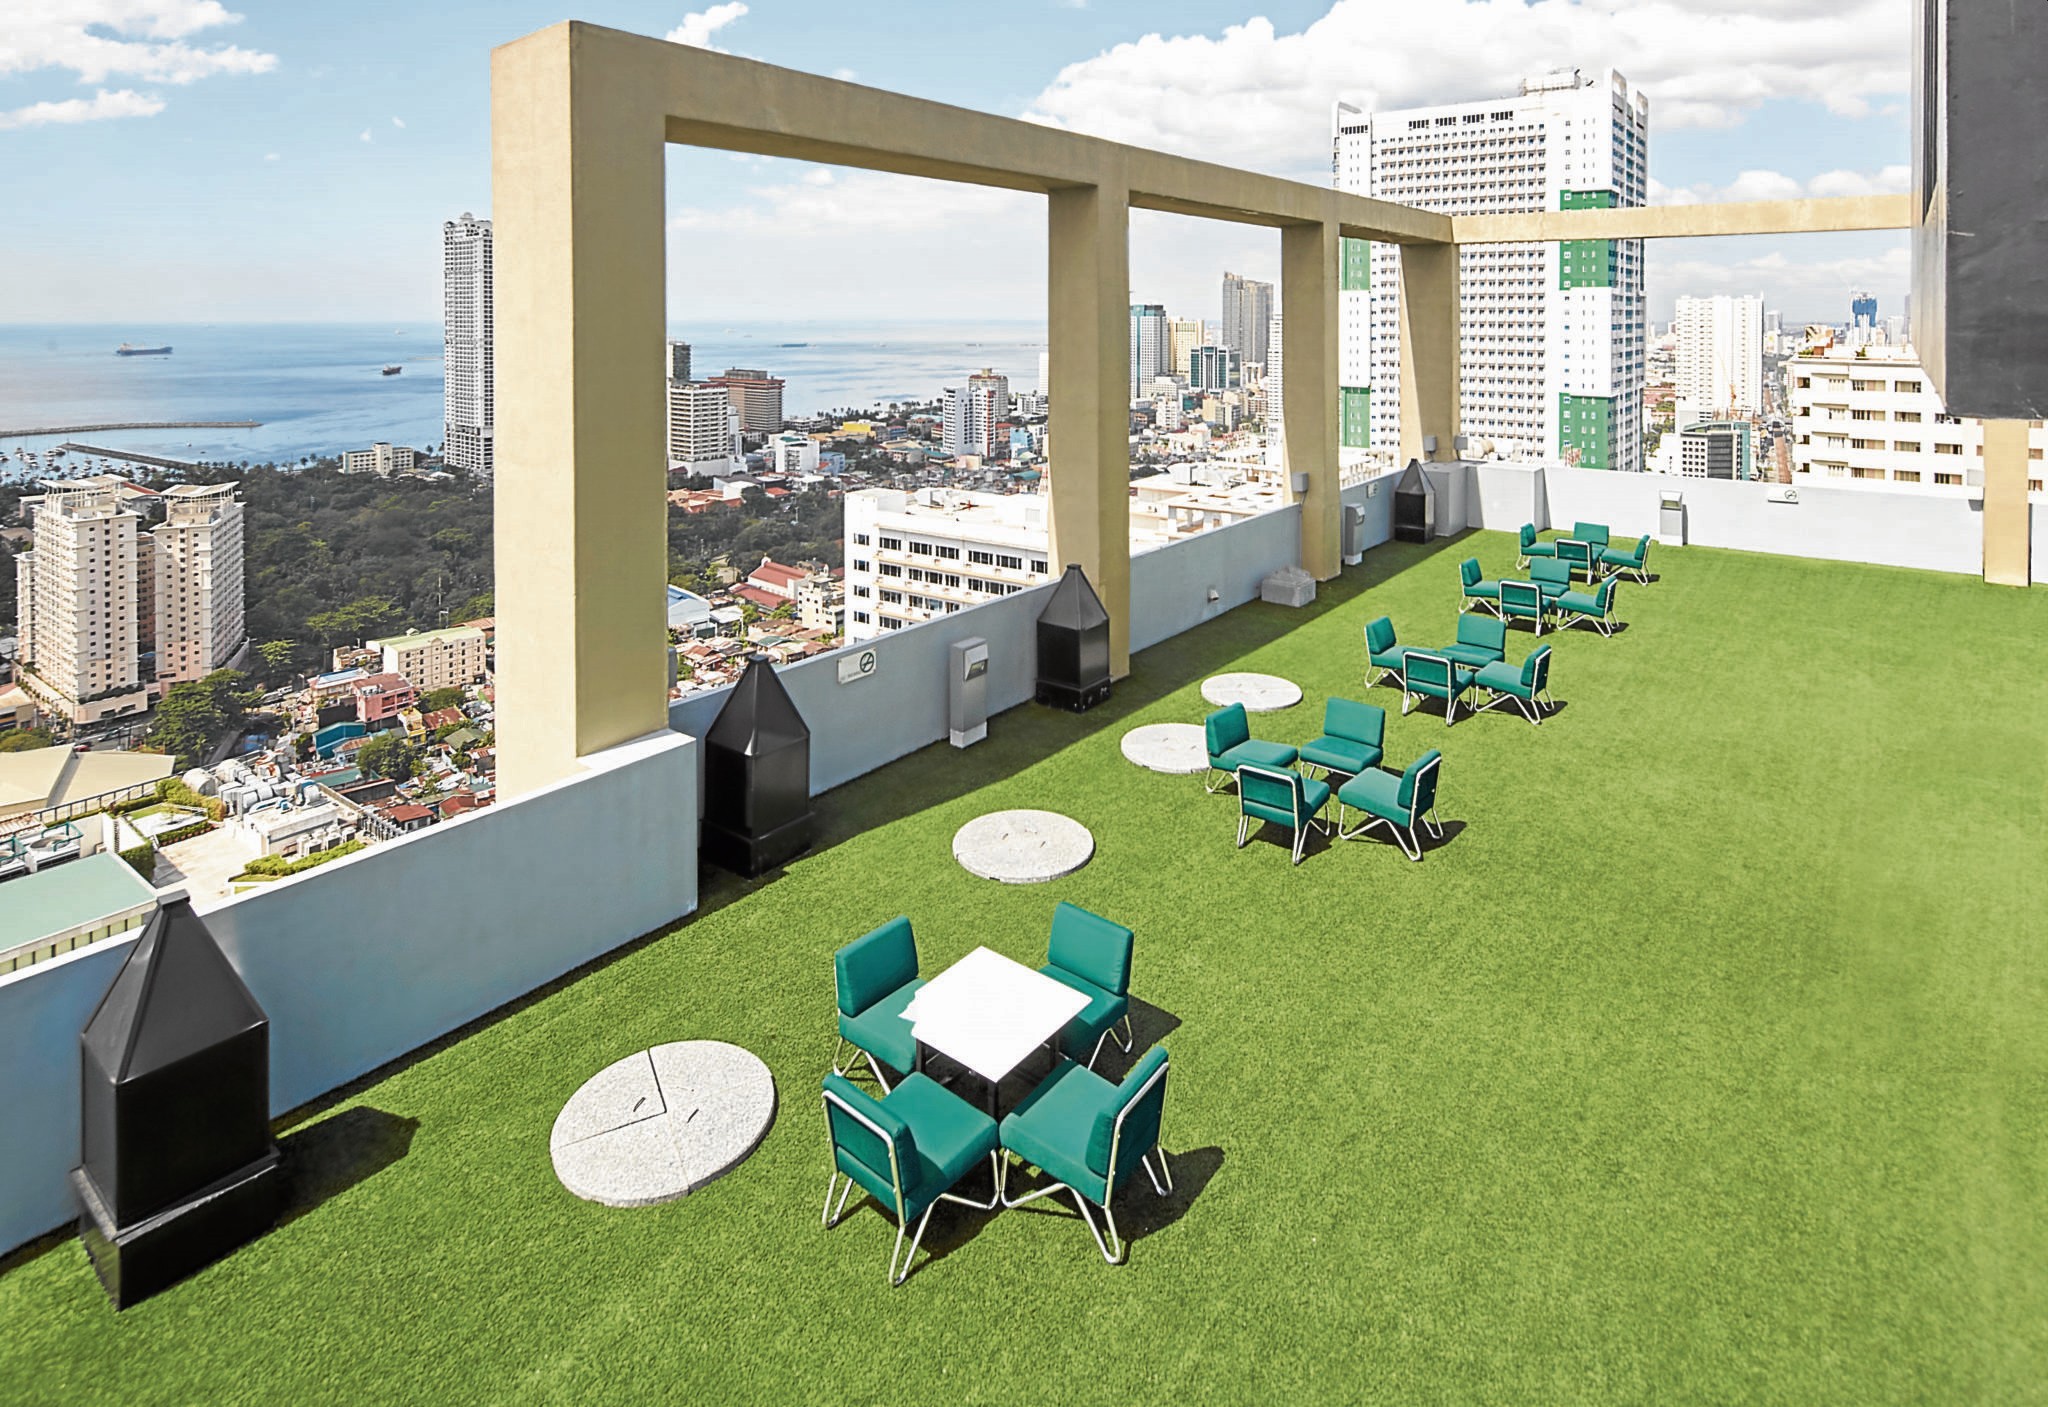 There is an artificial green grass floor beneath emerald green chairs on the sky deck area.